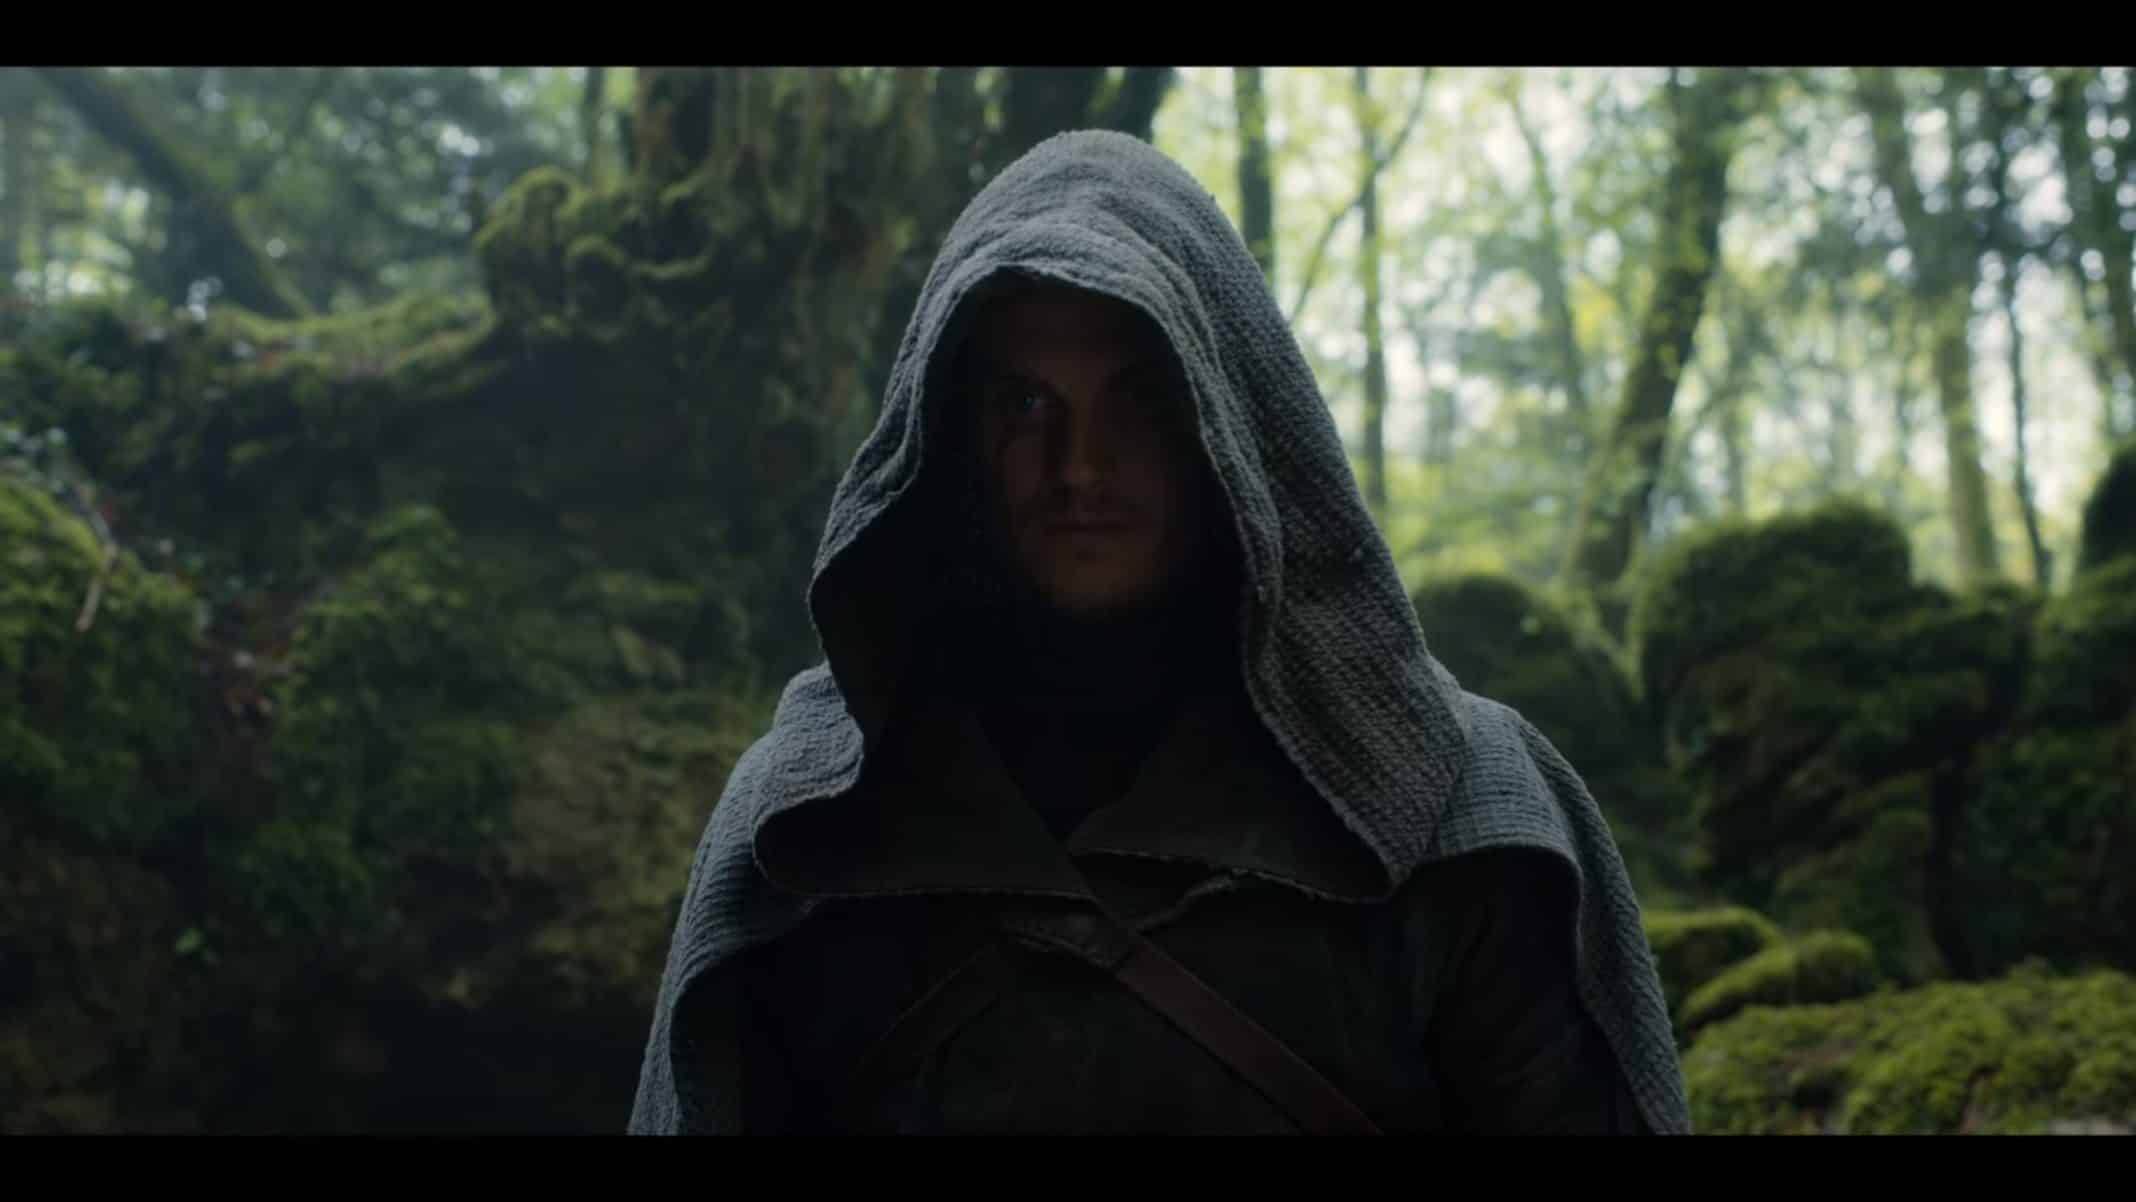 The Weeping Monk (Daniel Sharman) about to be in action.